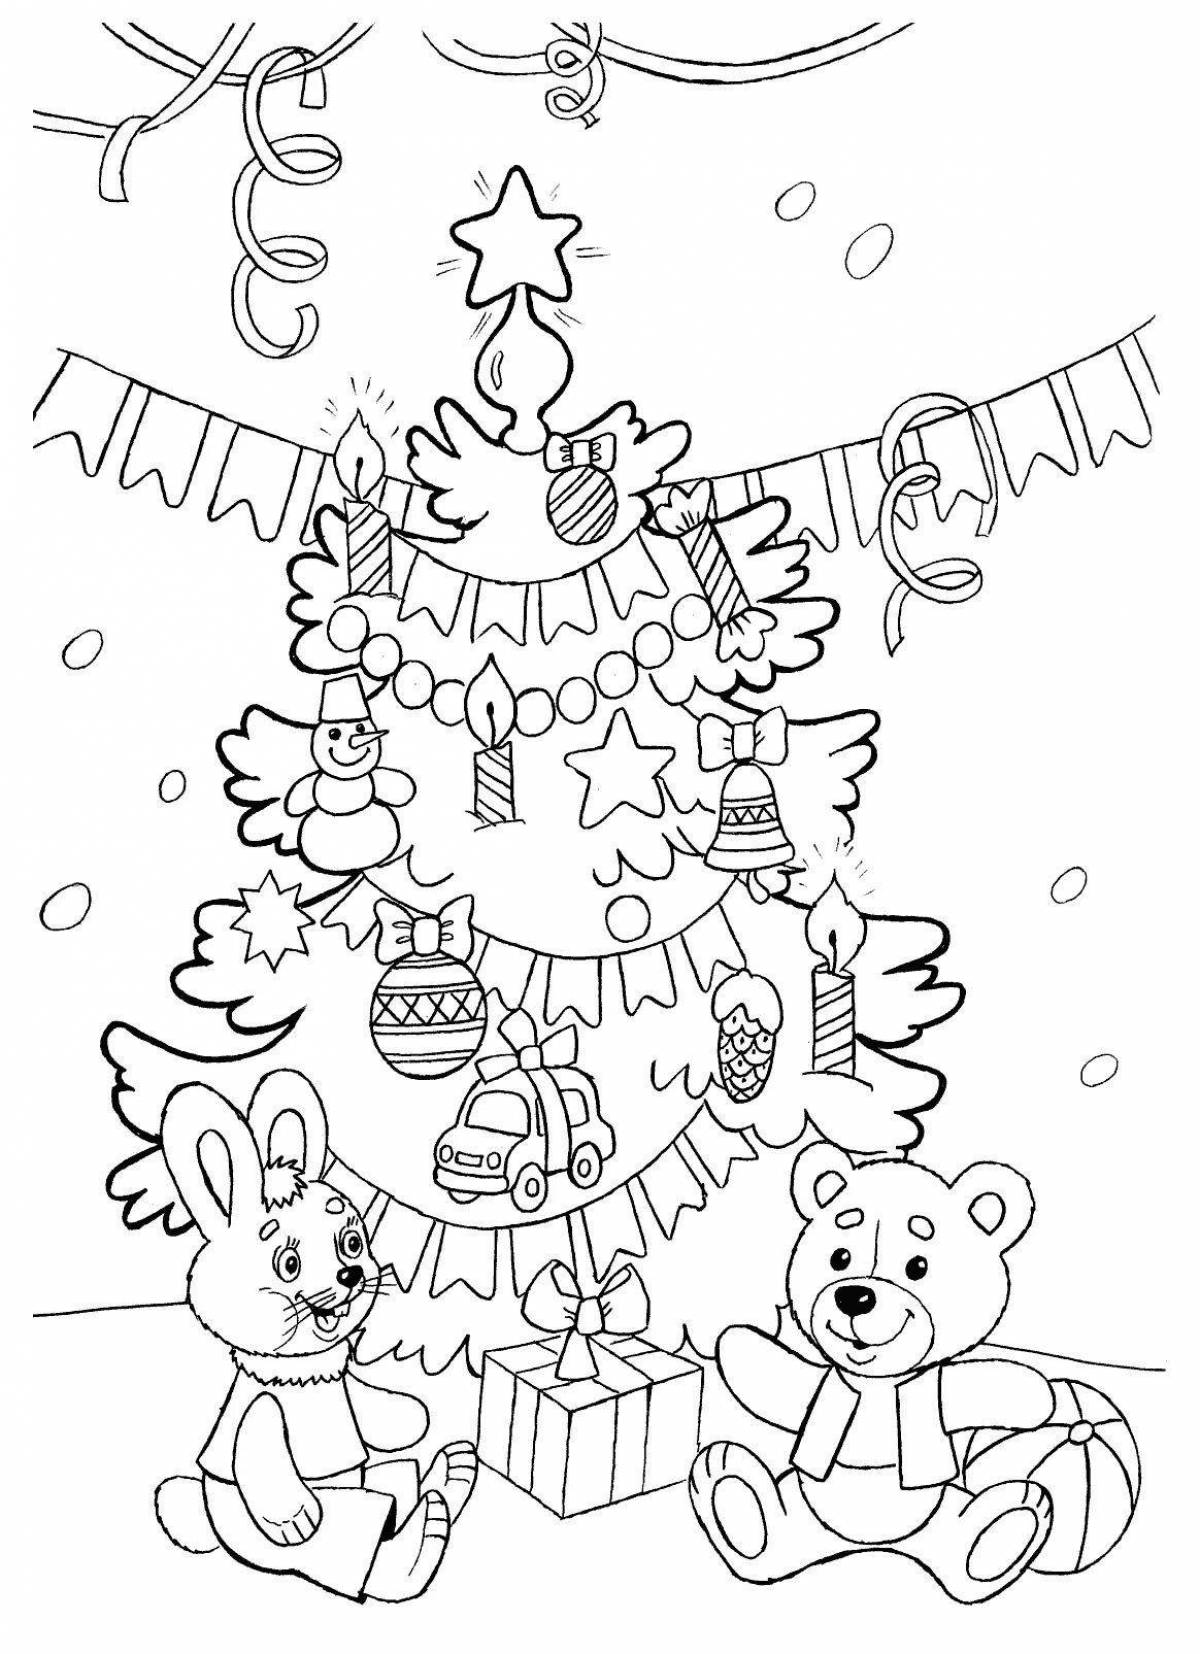 Funny Christmas tree with toys